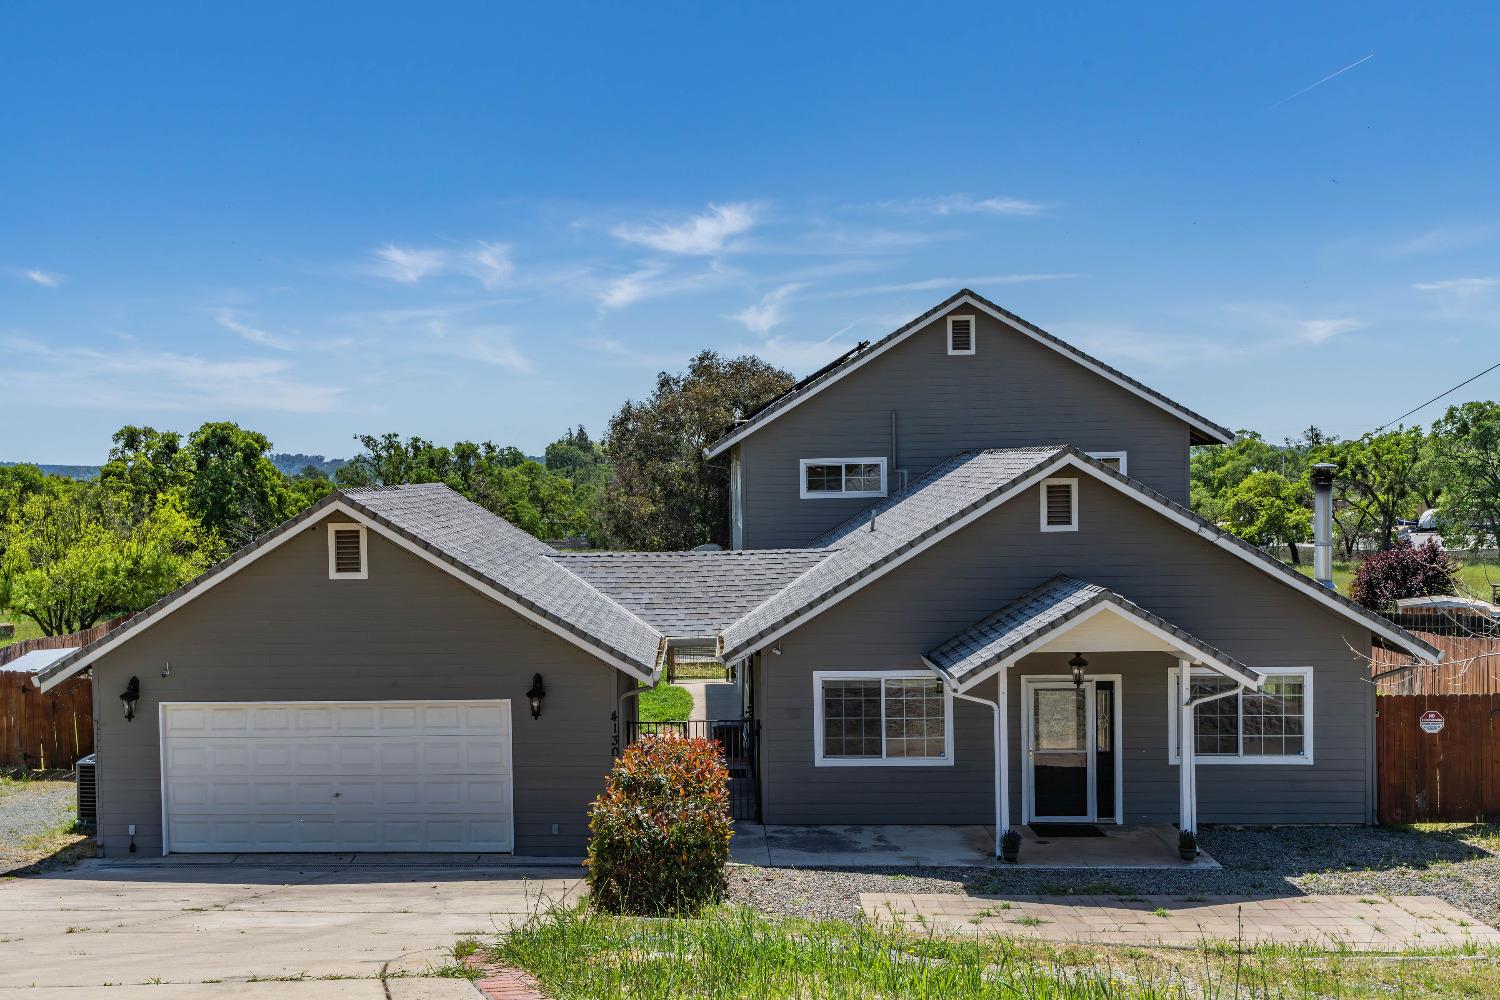 Photo of 4130 Lakeview Dr in Ione, CA